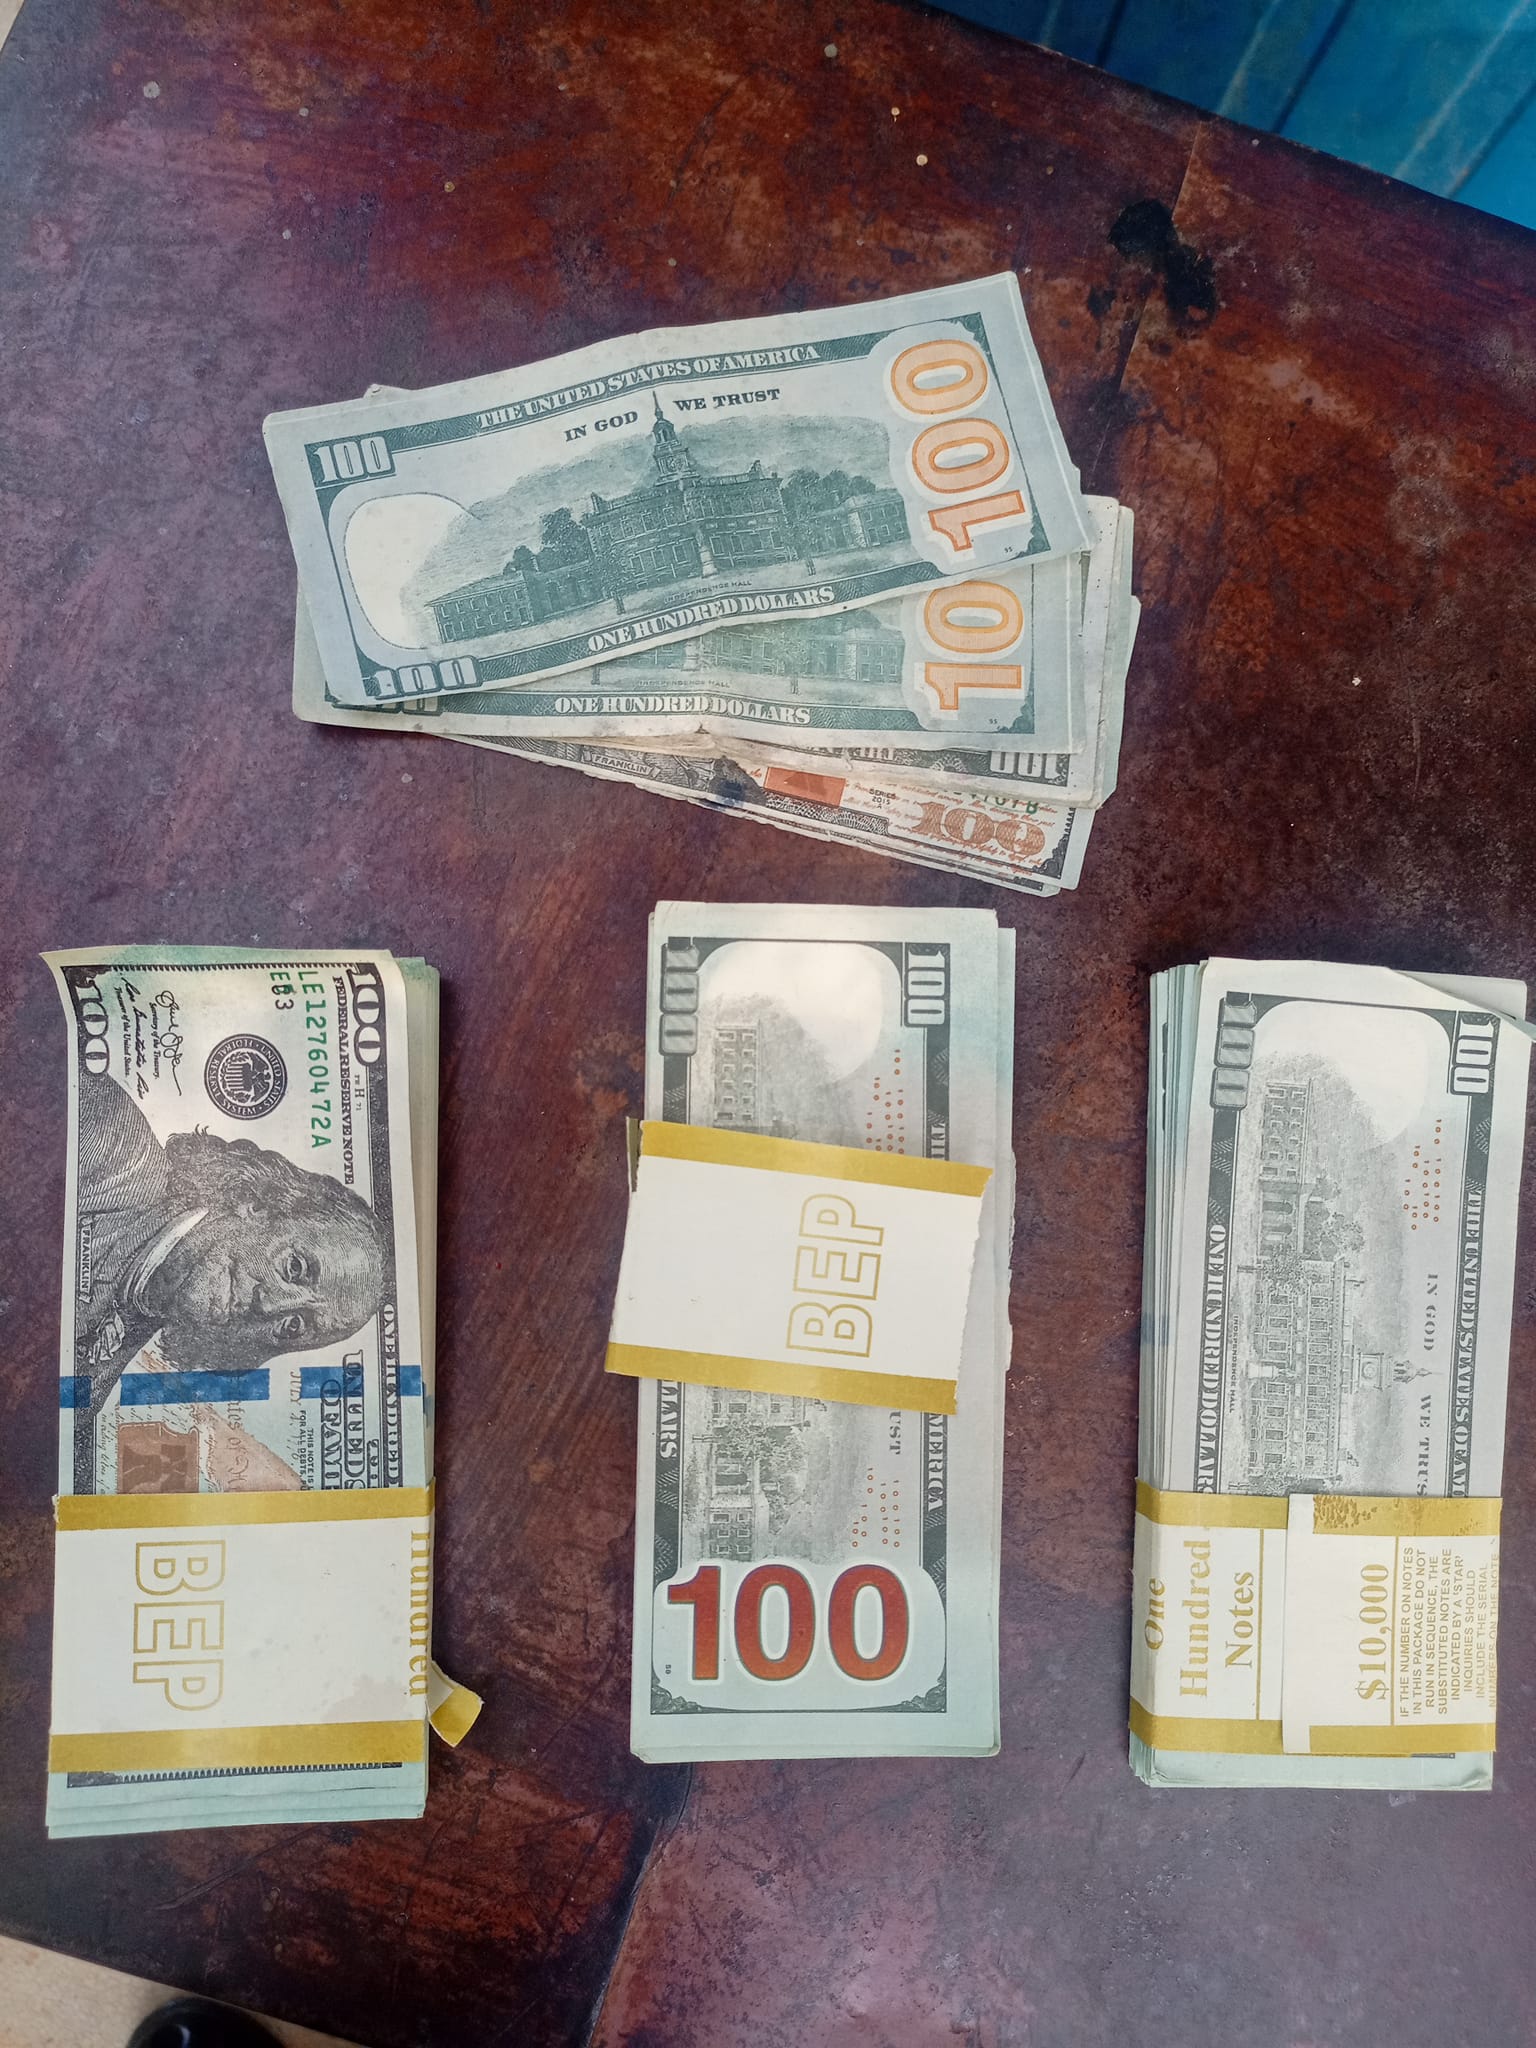 NSCDC arrests two suspects over possession of counterfeit foreign currency in Jigawa